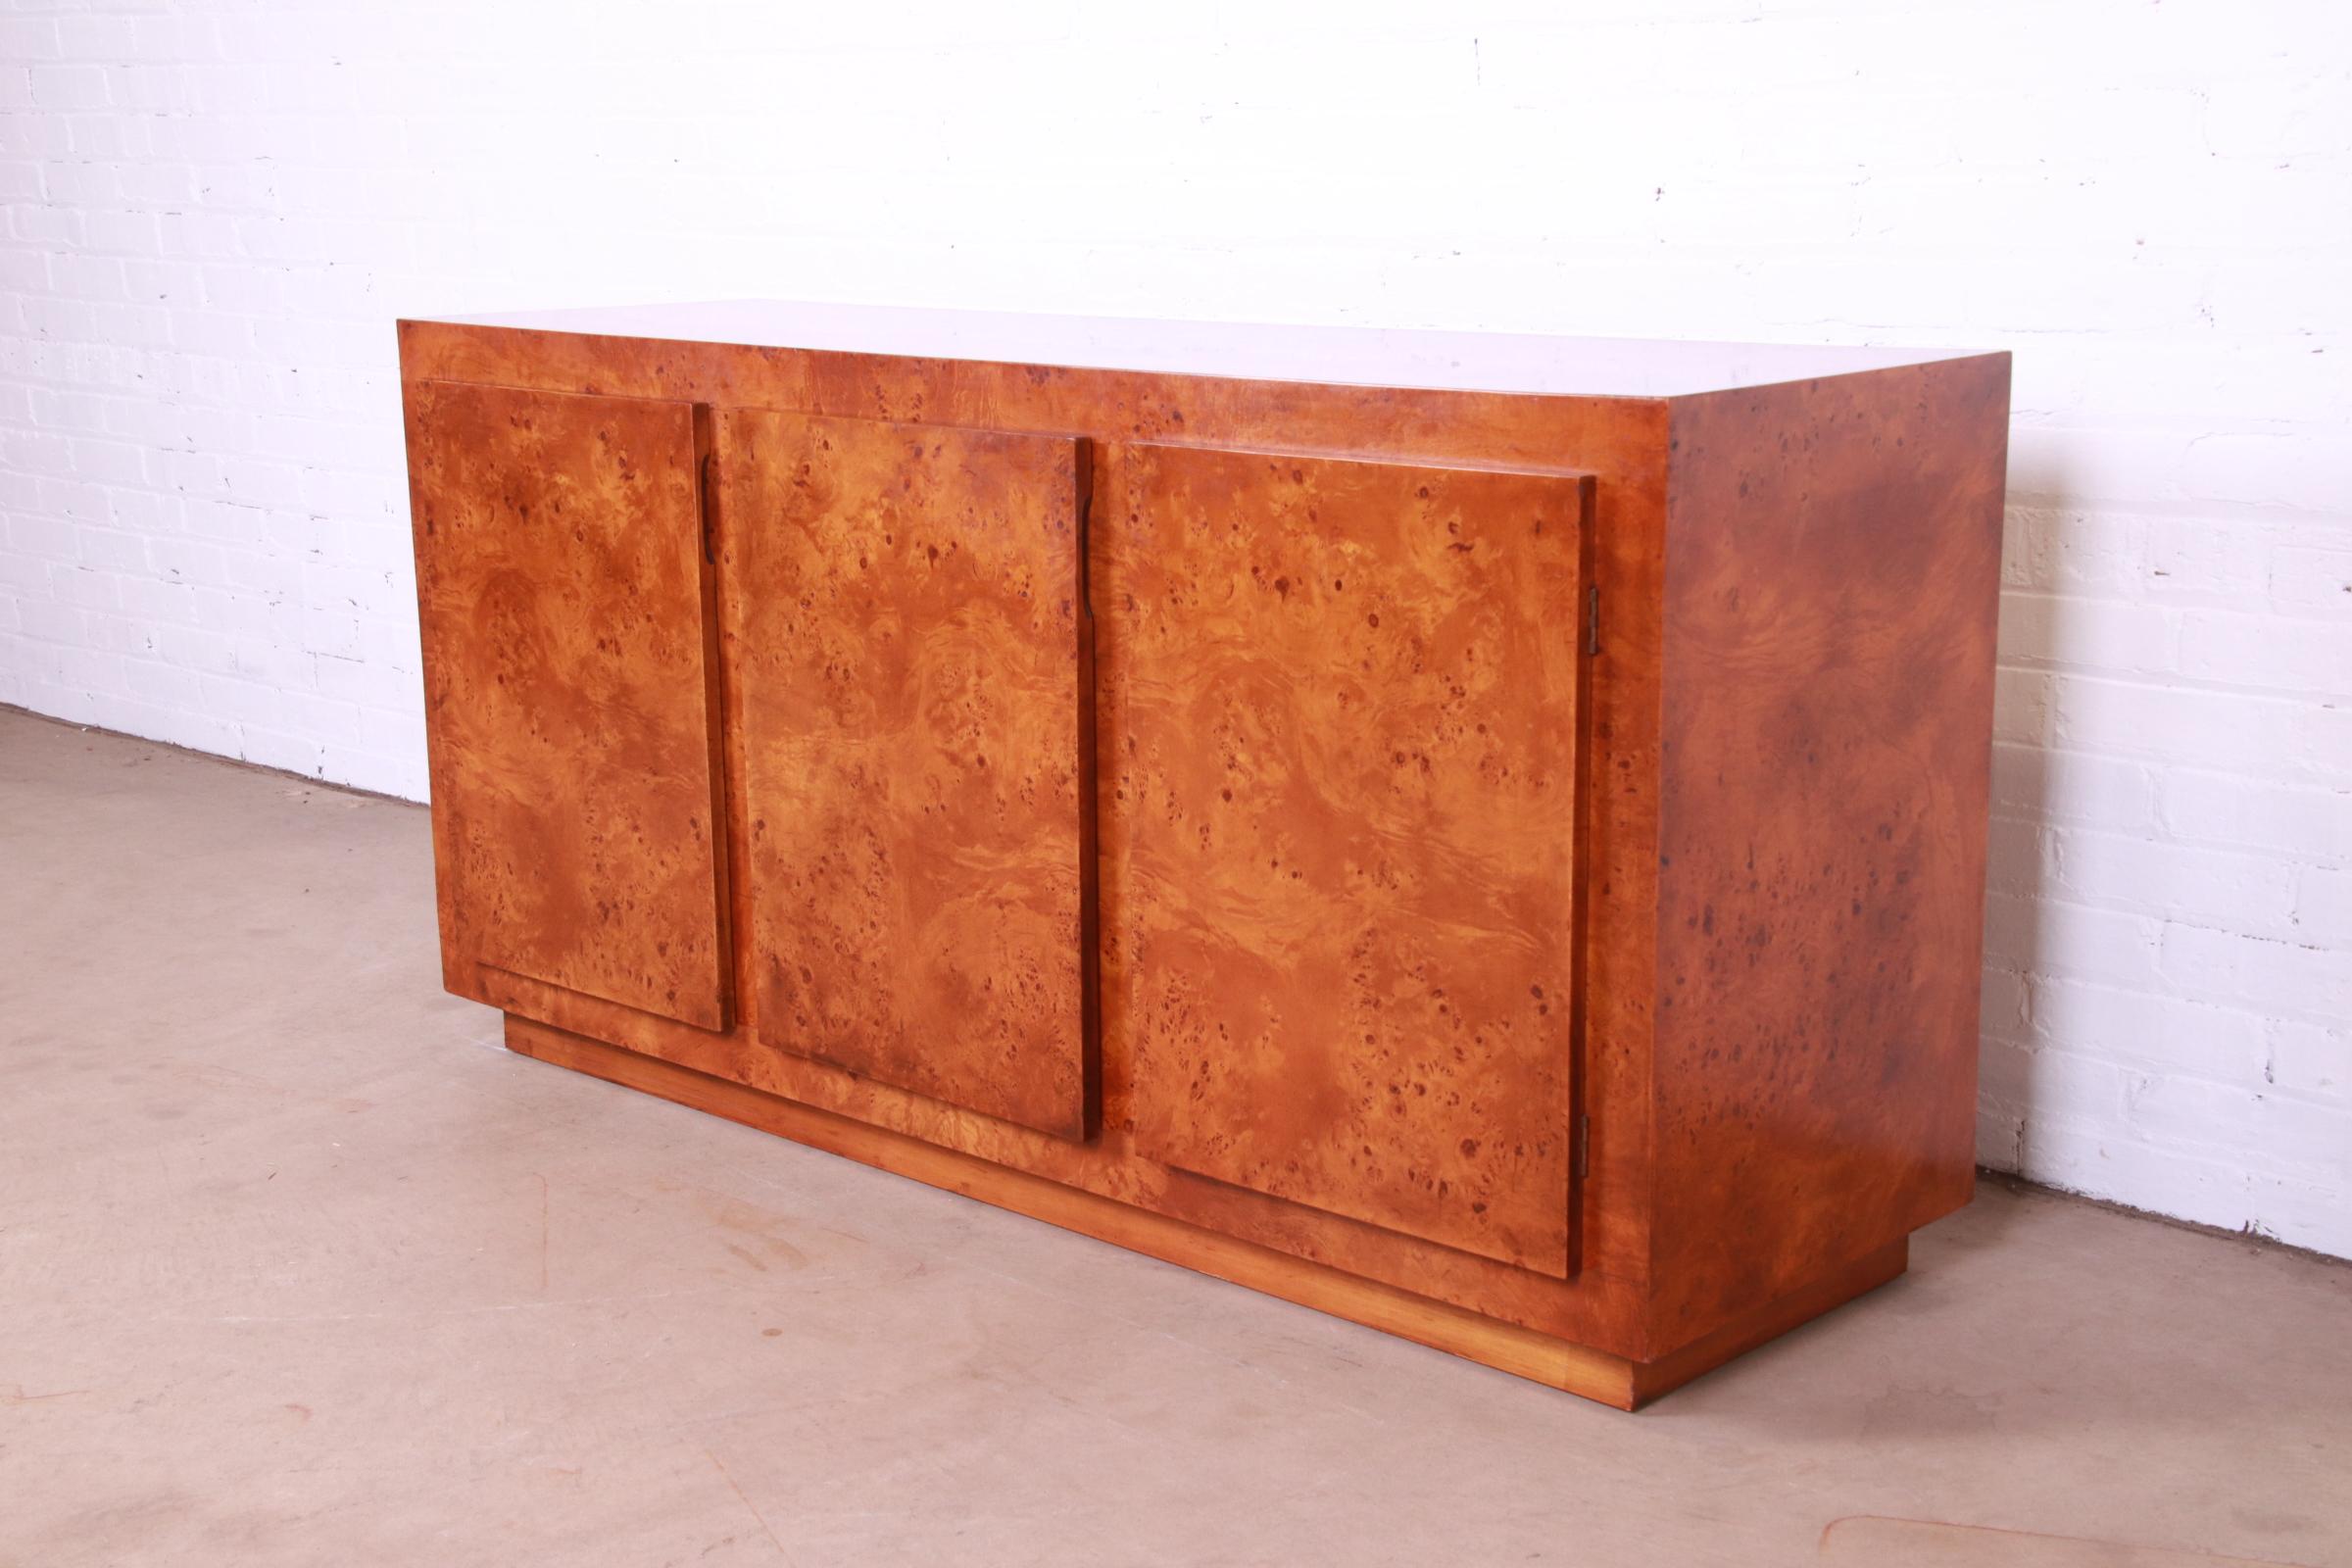 American Milo Baughman Style Burled Olive Wood Sideboard, Credenza, or Bar Cabinet For Sale